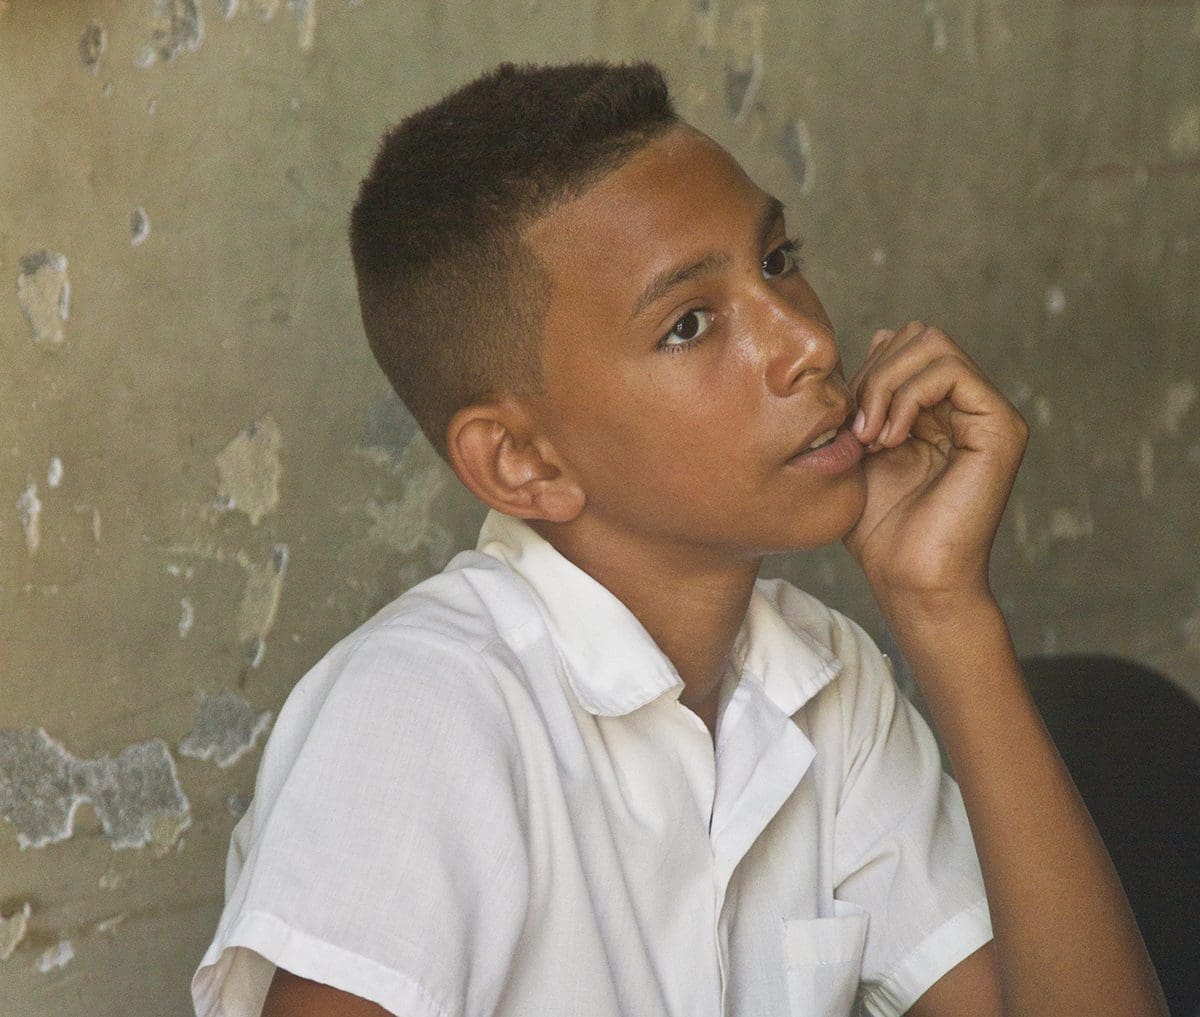 A boy in a white shirt with his hand on his chin.